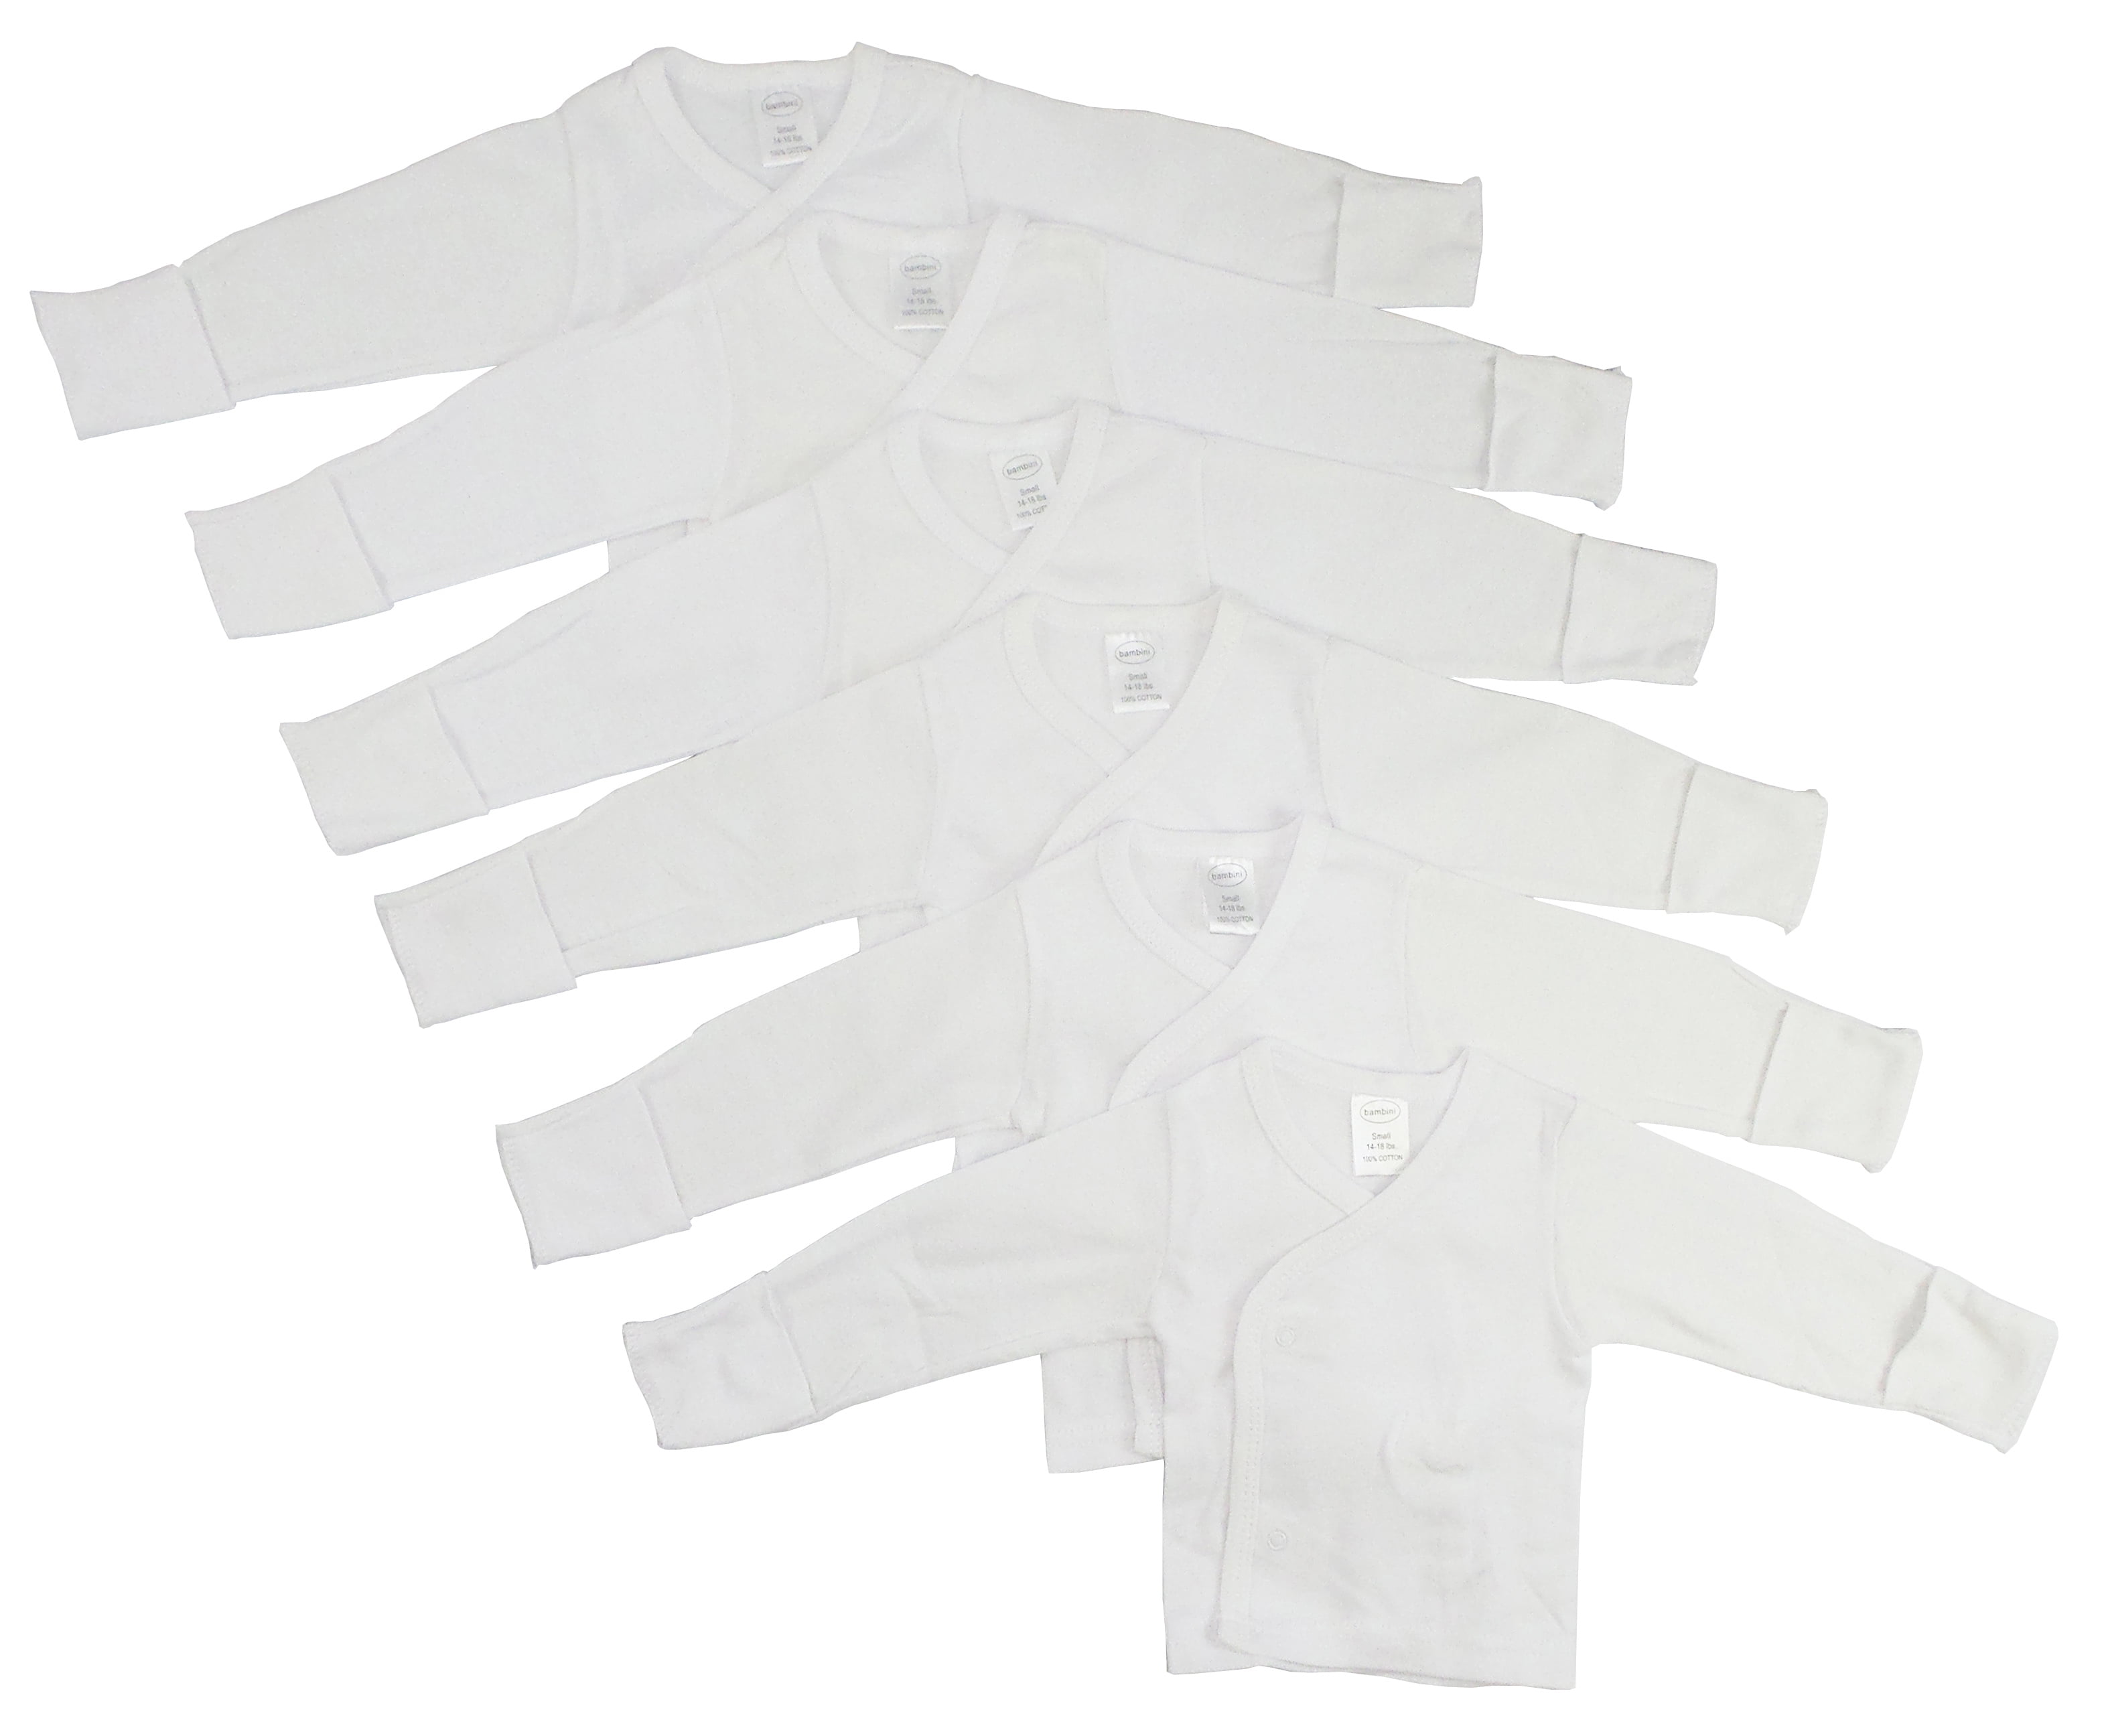 Cs-071p-071p Long Sleeve Side Snap With Mitten, White - Preemie